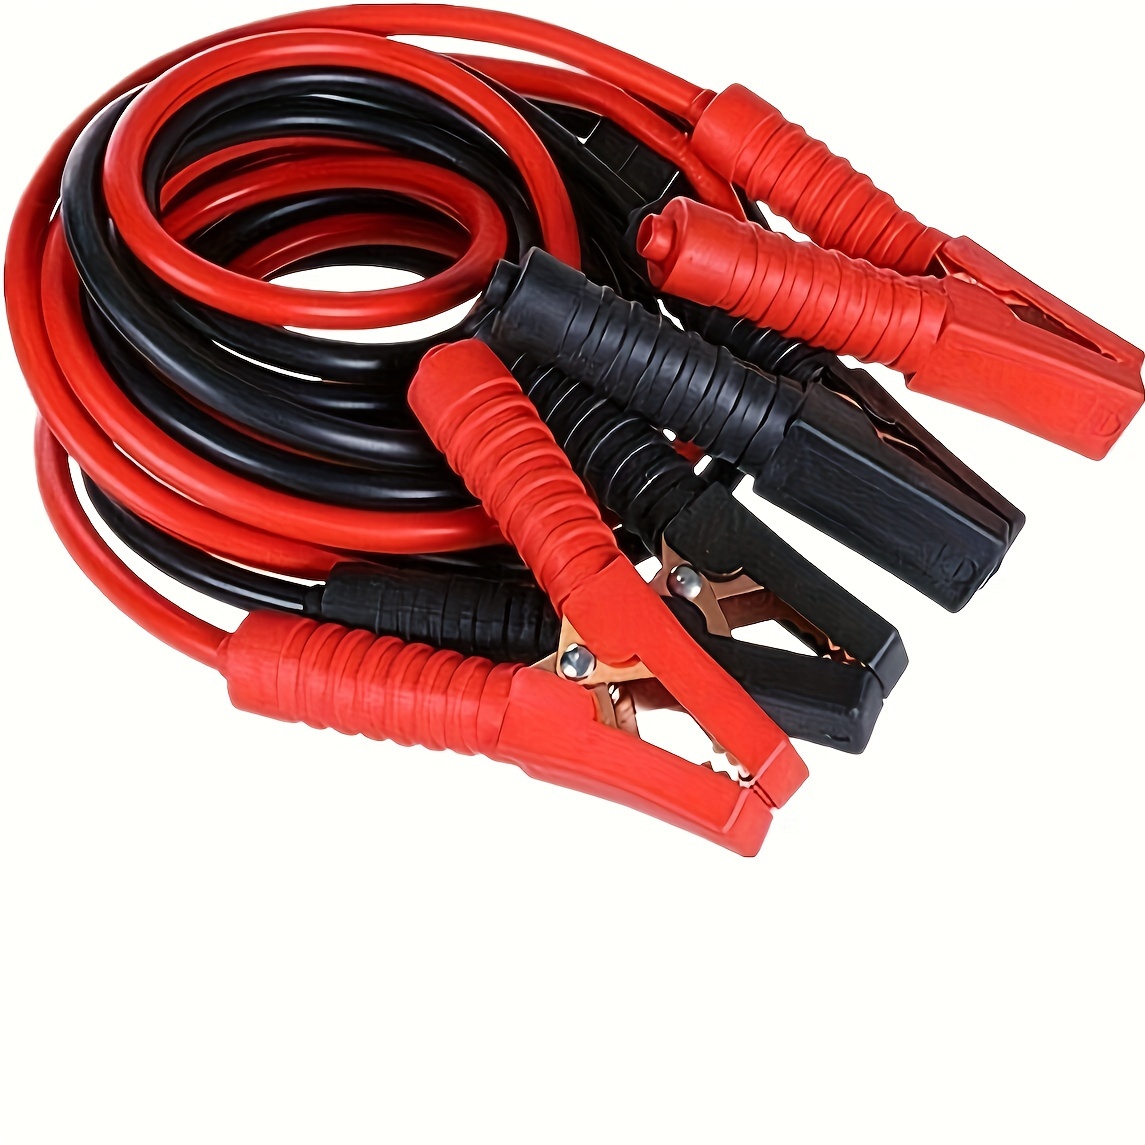 

3.8m 500a Jumper Cable Jumper Cable Starter Cable Car Booster Cable Alligator Clip Copper Jumper Wire Universal